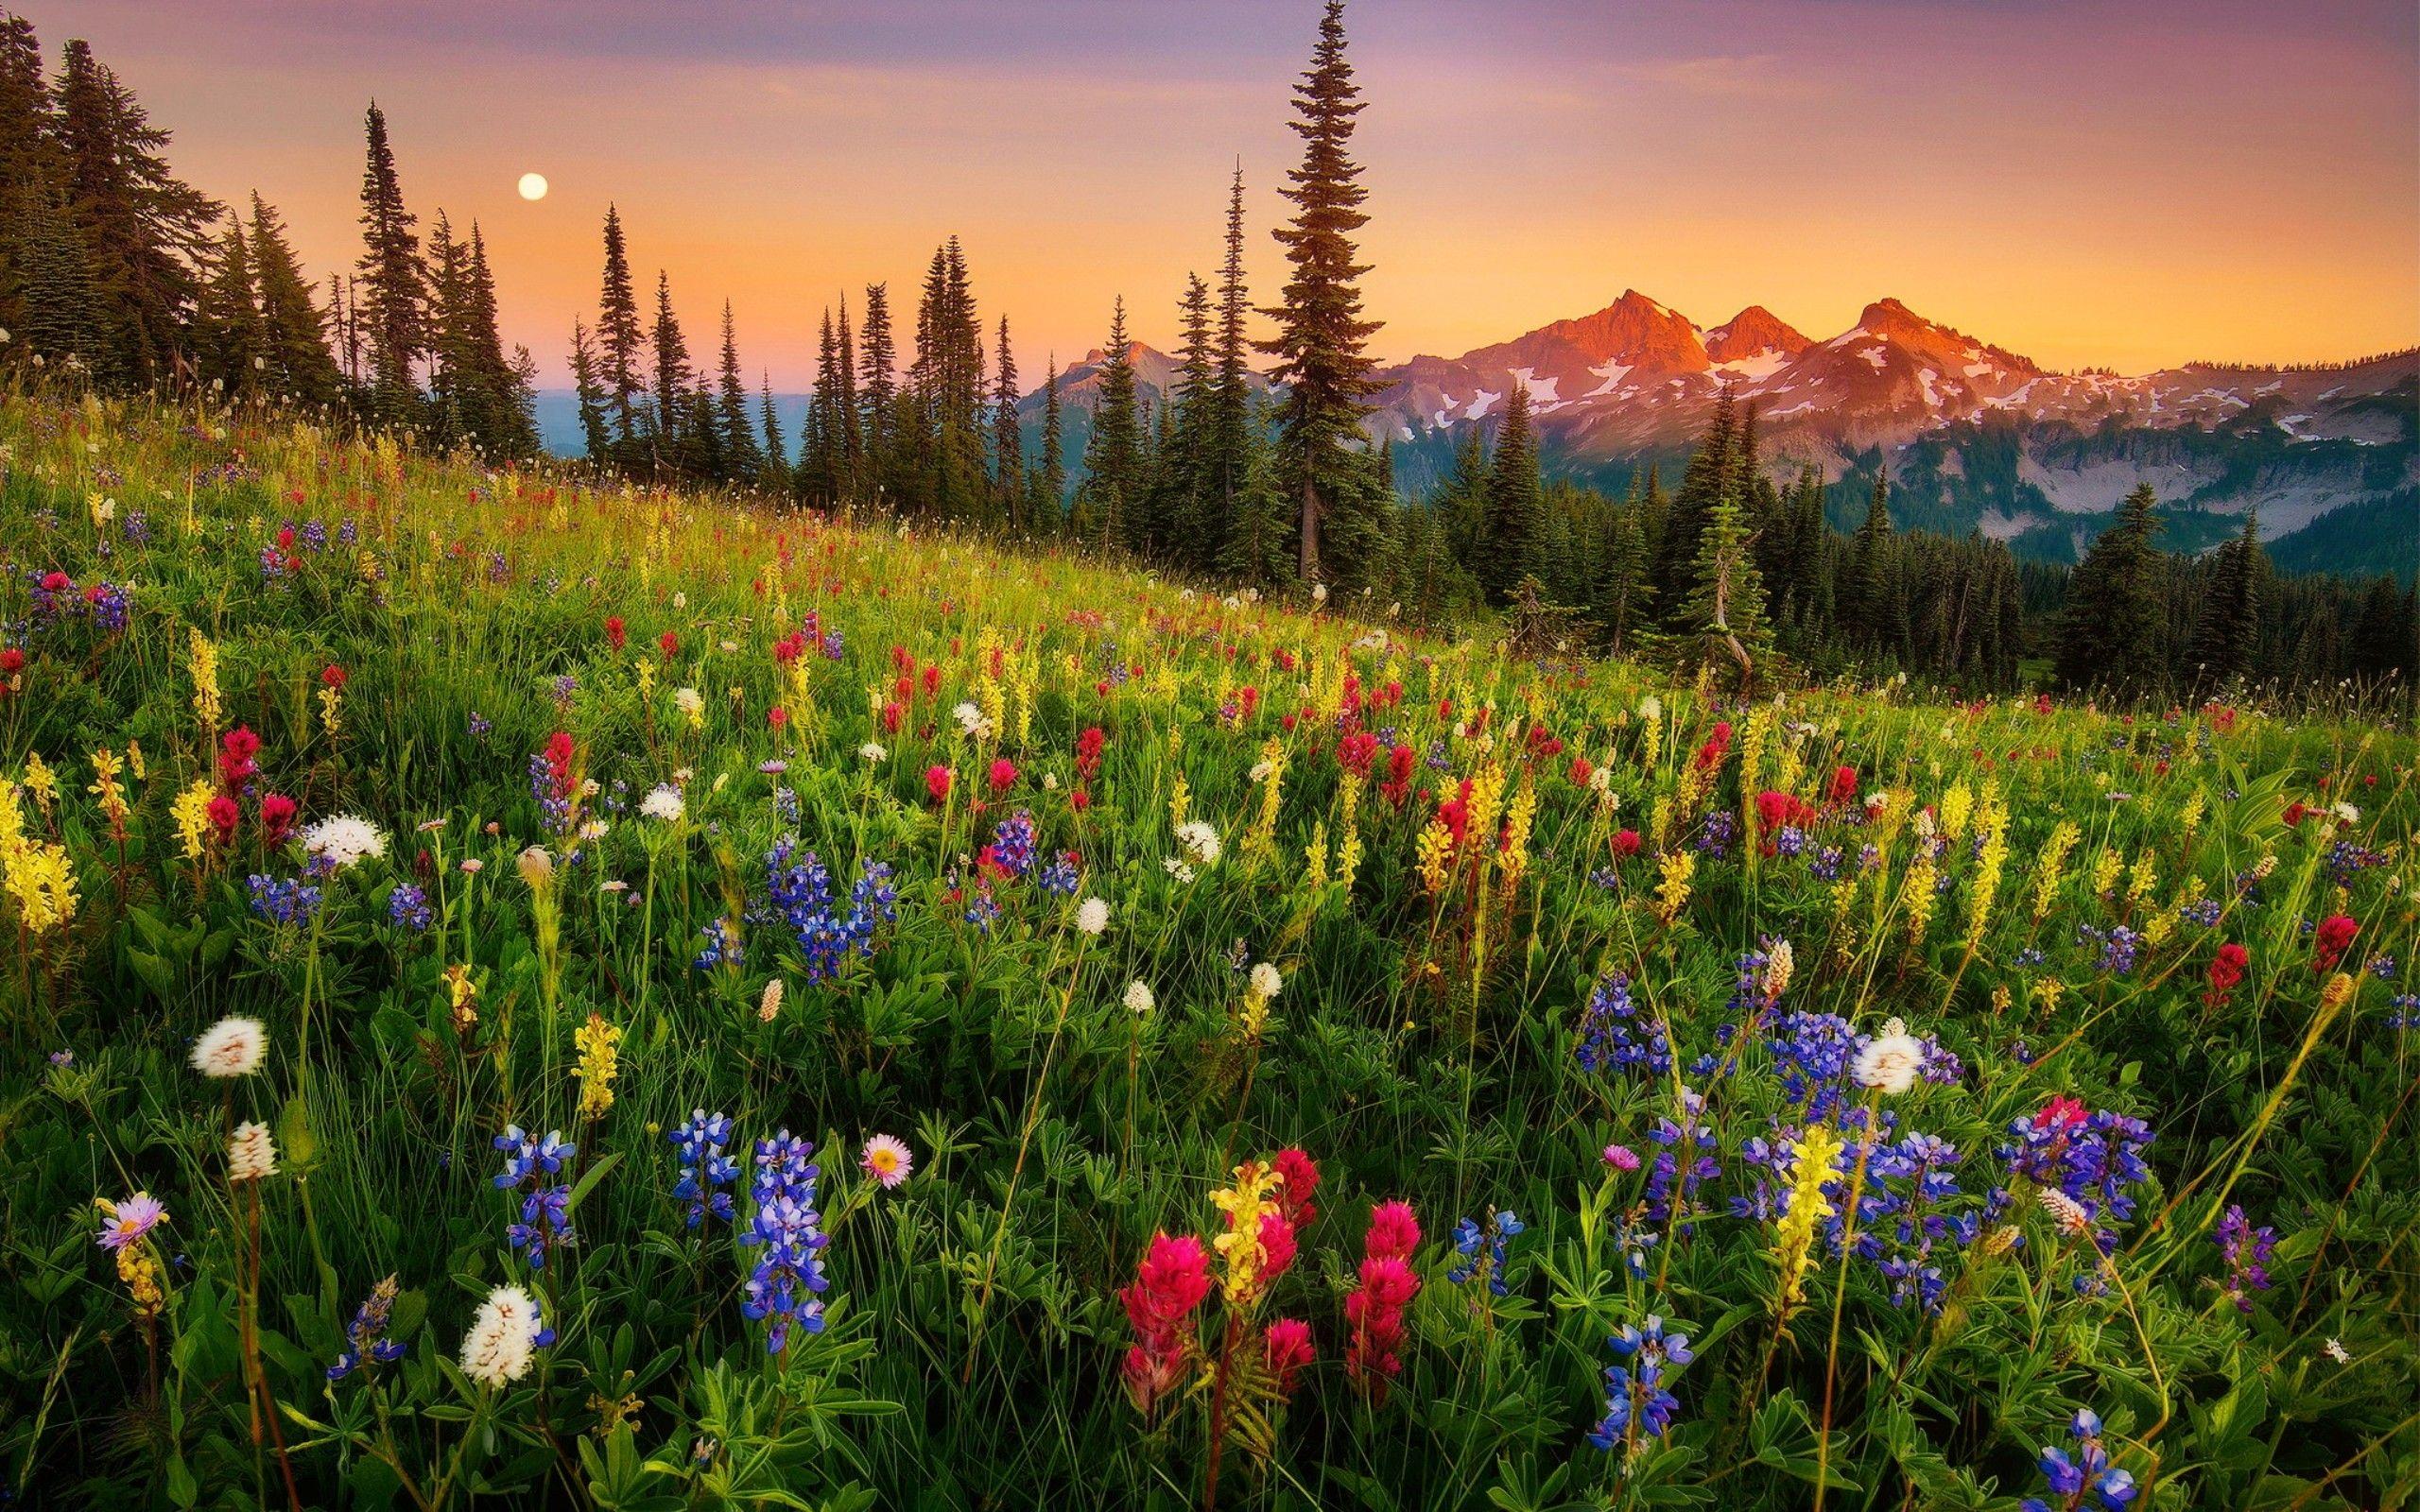 Mountain Wildflowers Wallpapers - Wallpaper Cave